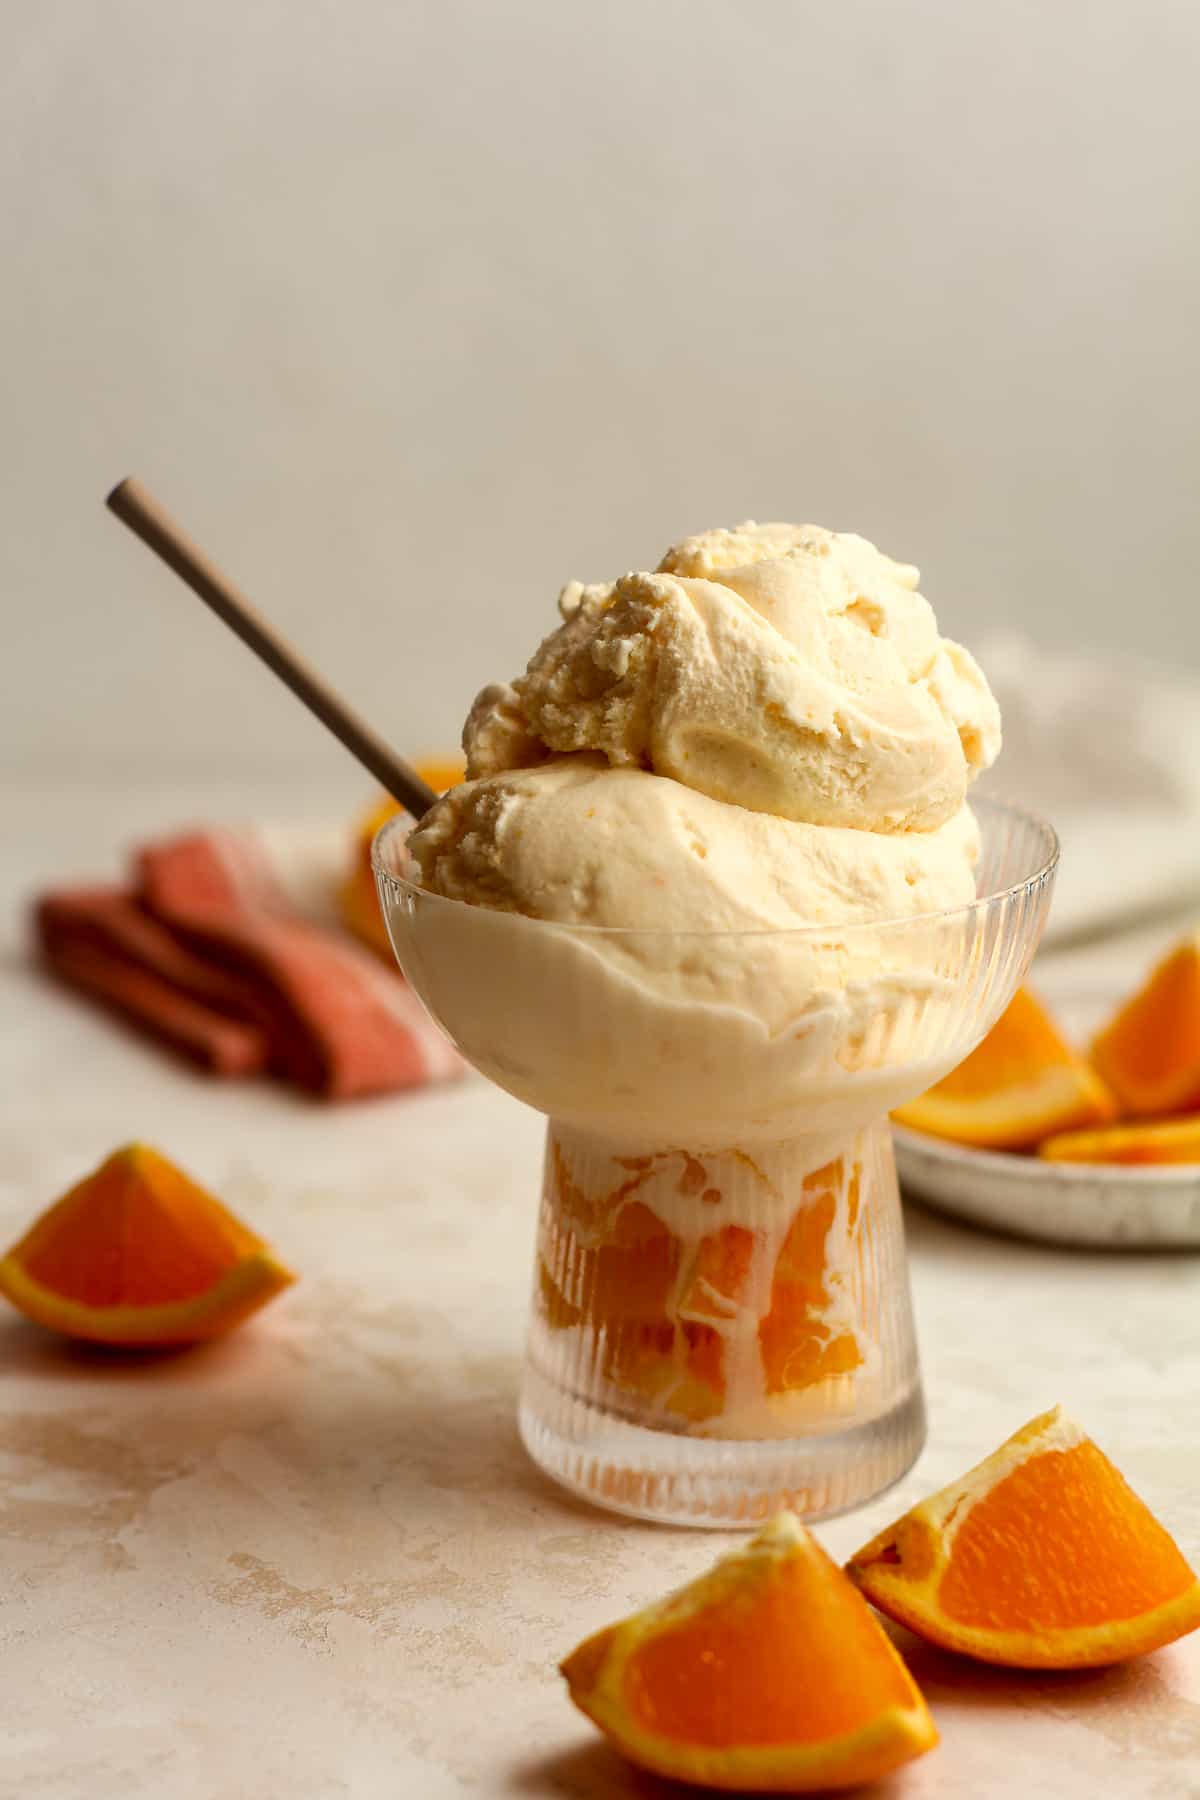 Side view of a bowl of orange creamsicle ice cream with a spoon.